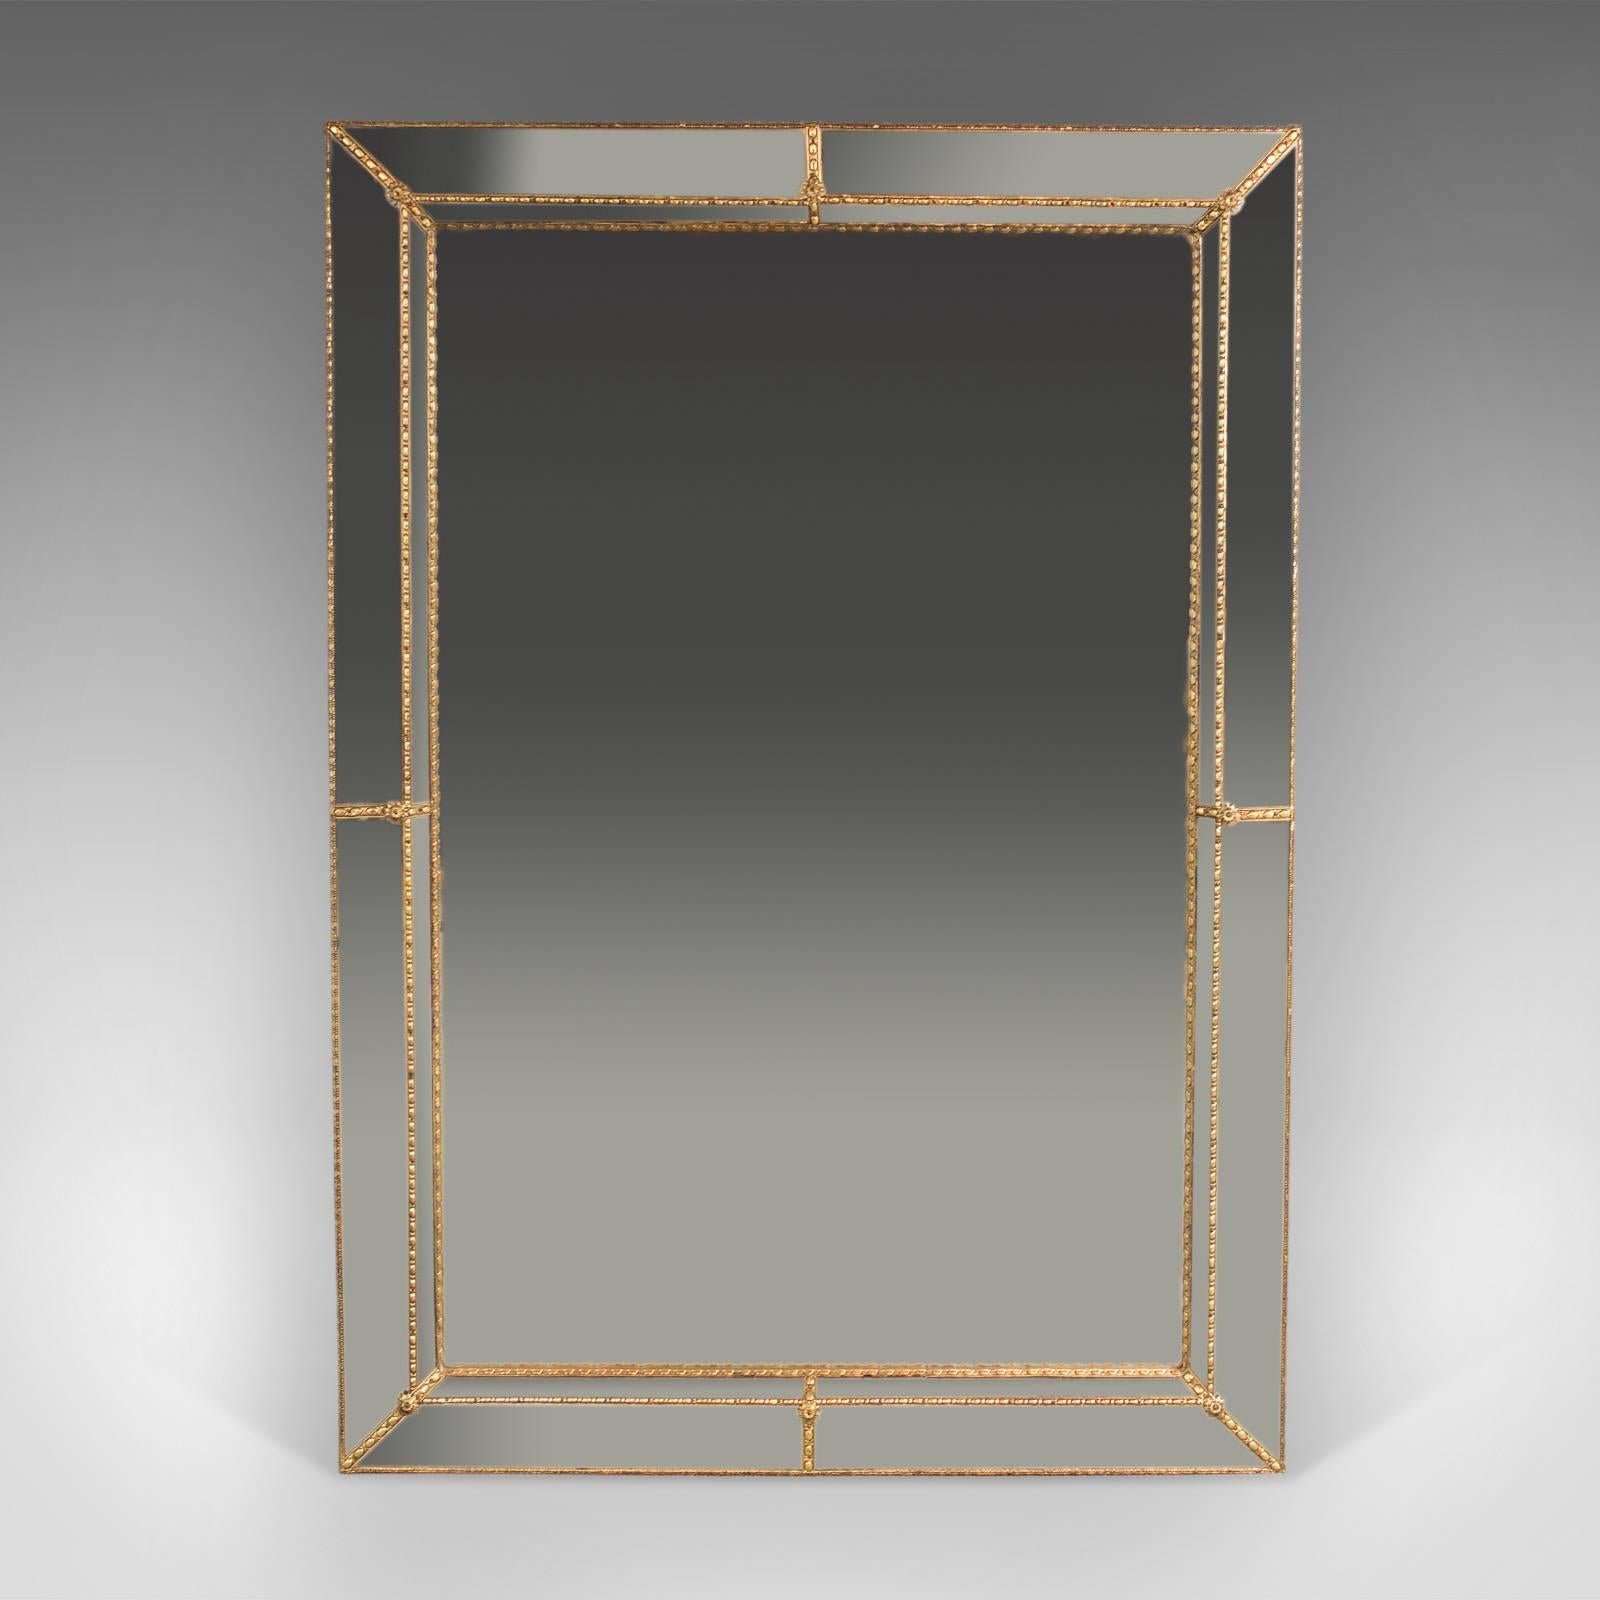 This is a Mid-Century wall mirror, cushioned overmantel or hall mirror.

Beaded gilt frame with rosette details to inner joints
Recessed mirror plate framed by canted rows of mirrored squares
Squares reflecting hints of colored hues

A quality